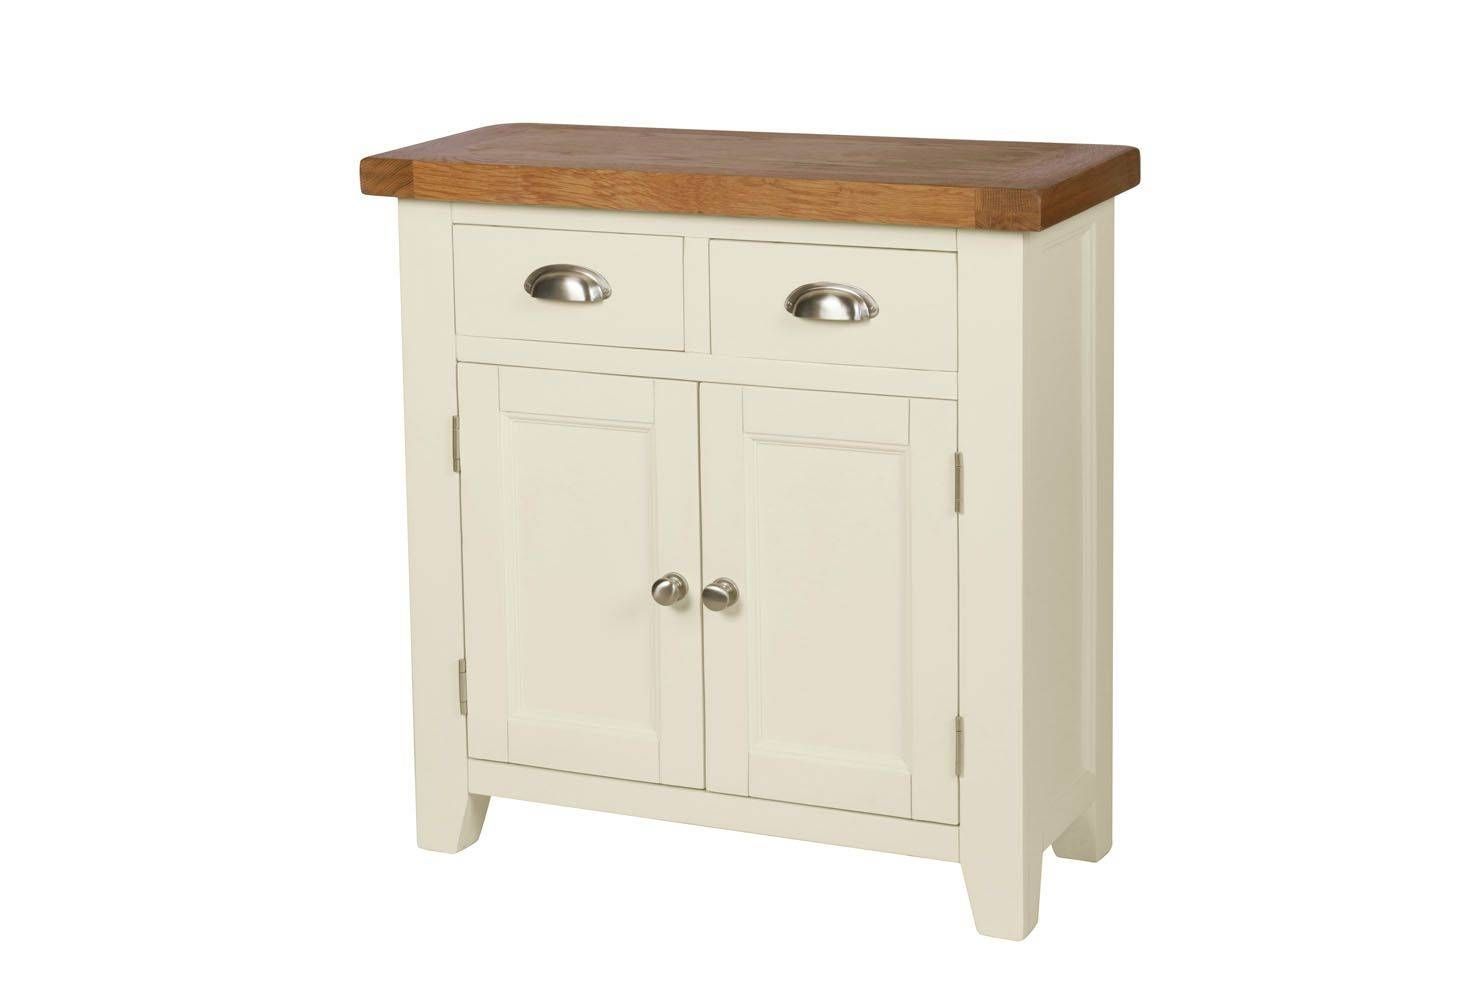 Country Cottage 80cm Cream Painted Small Oak Sideboard With Regard To Current Small Oak Sideboards (View 15 of 15)